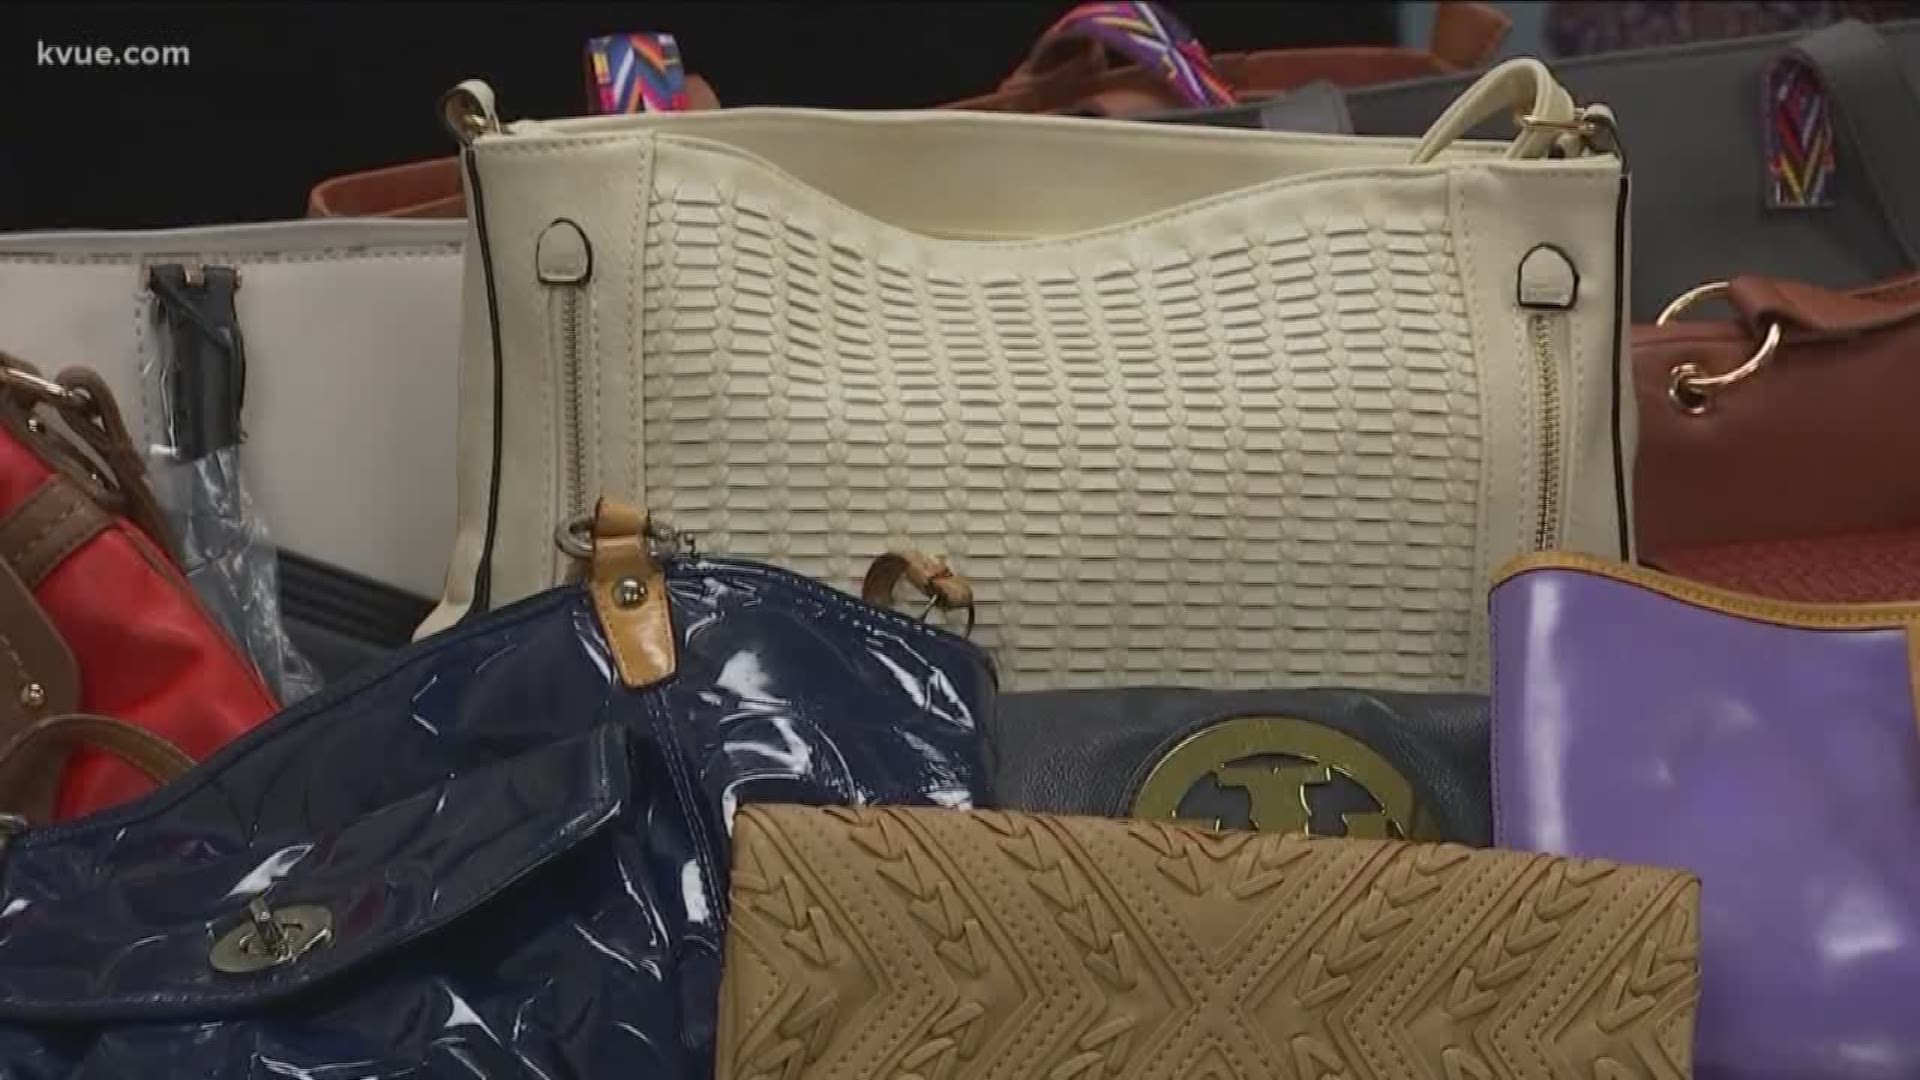 The Texas Advocacy Project and Travis County Sheriff's Office are teaming up to collect handbags for victims of domestic violence and sexual assault.